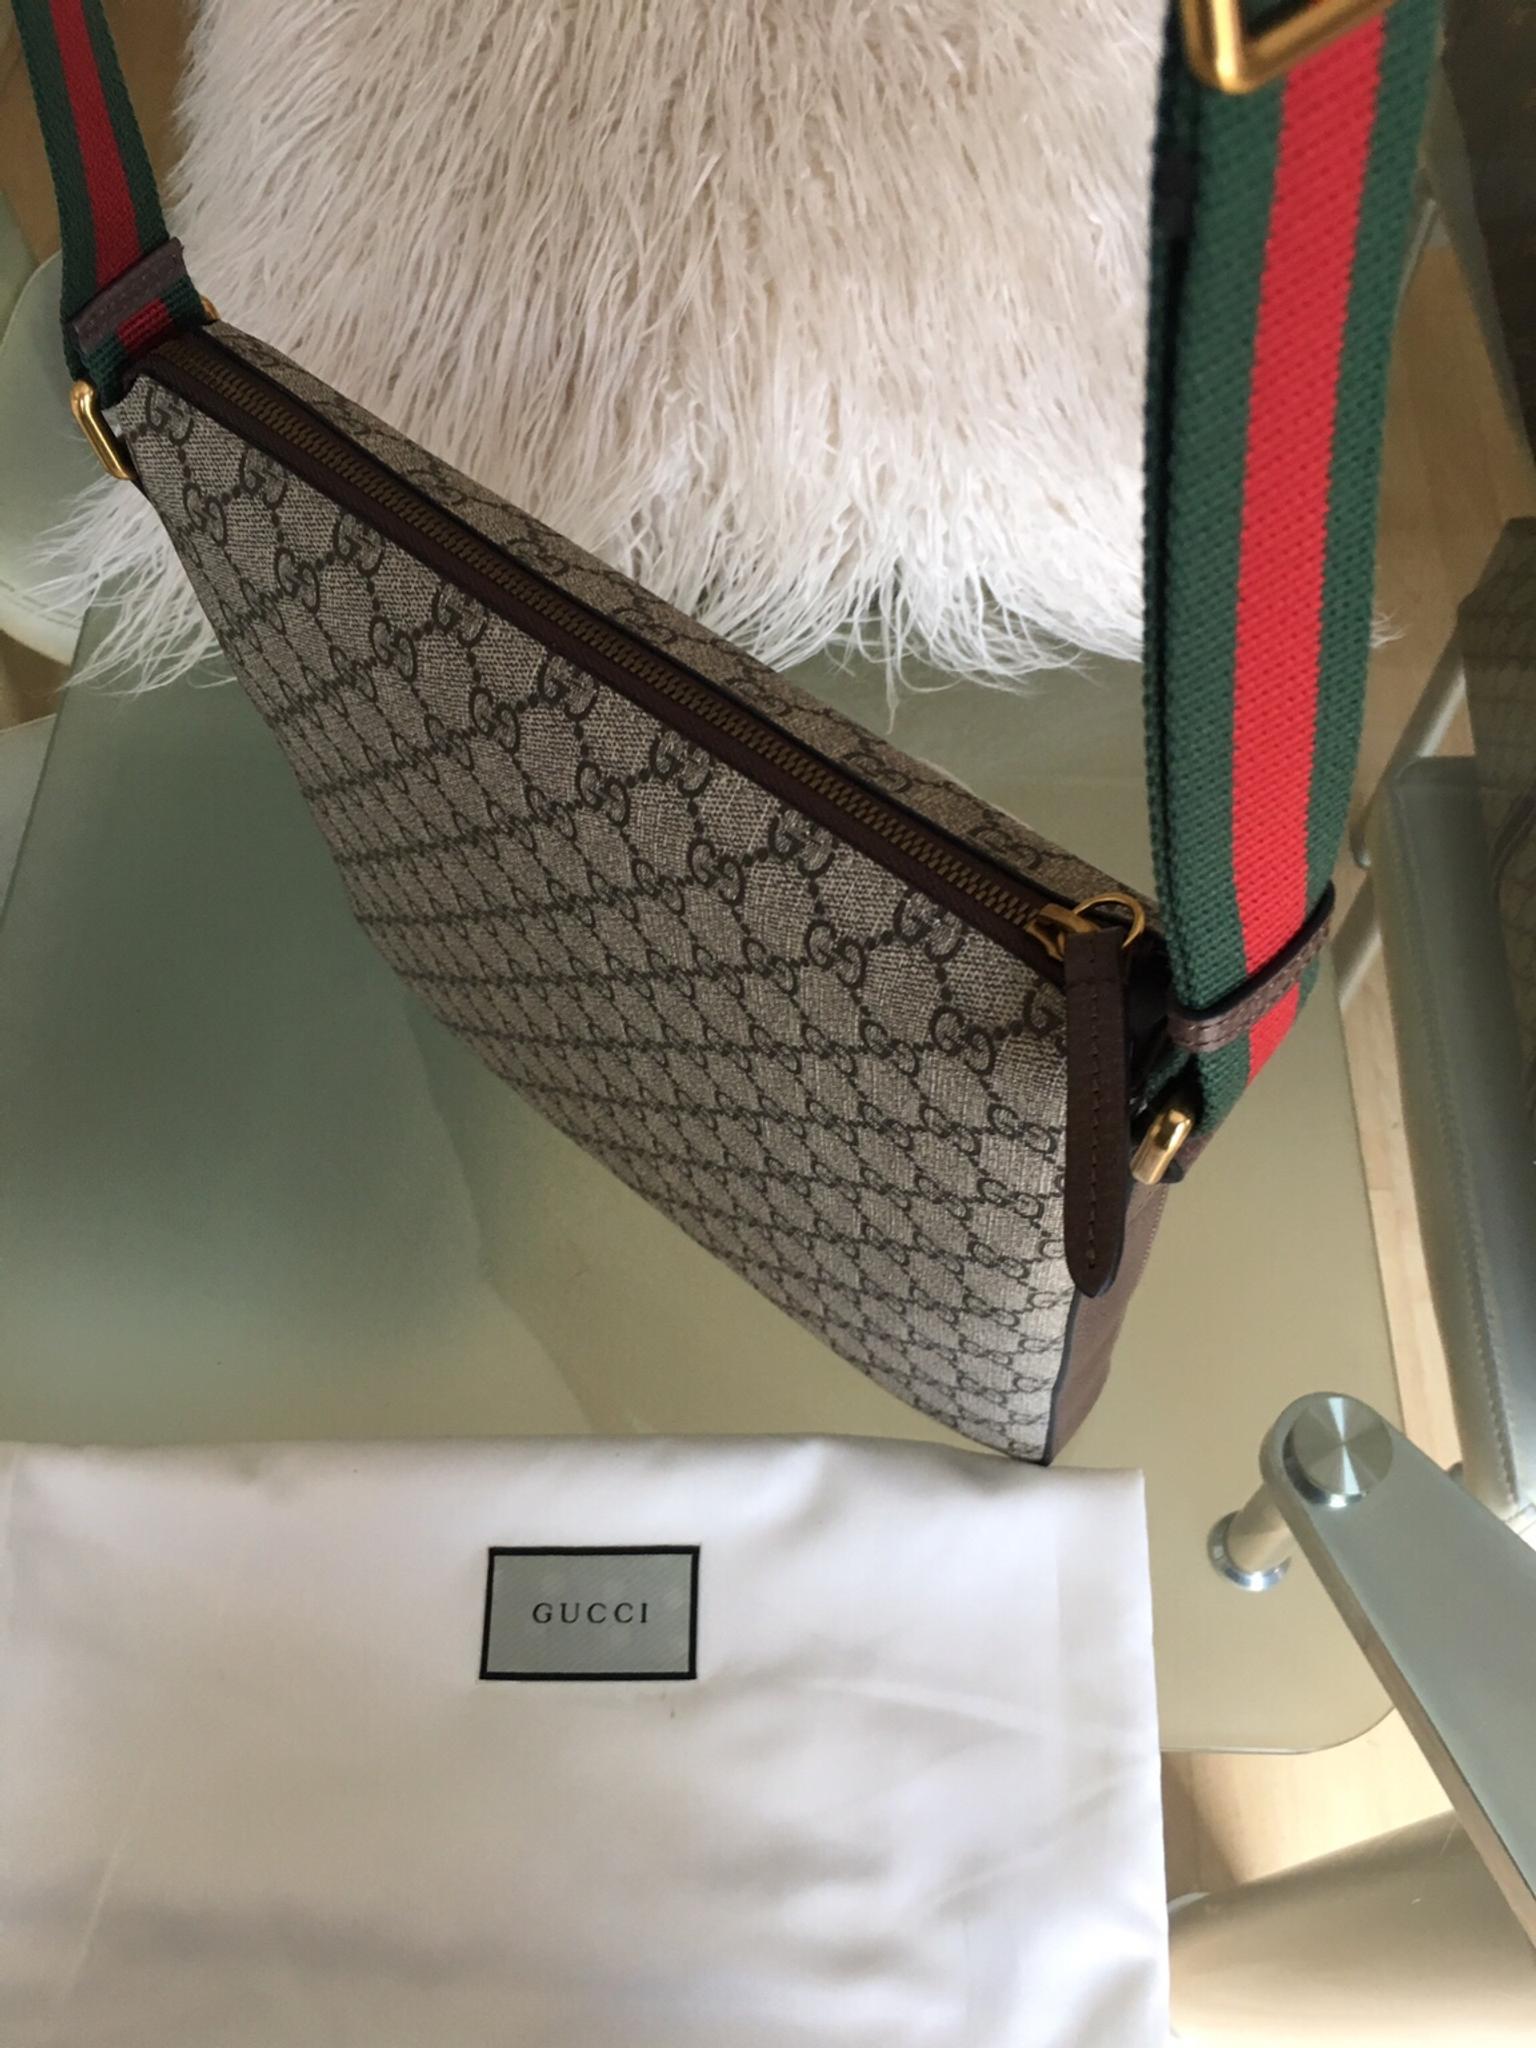 gucci bag with red and green strap